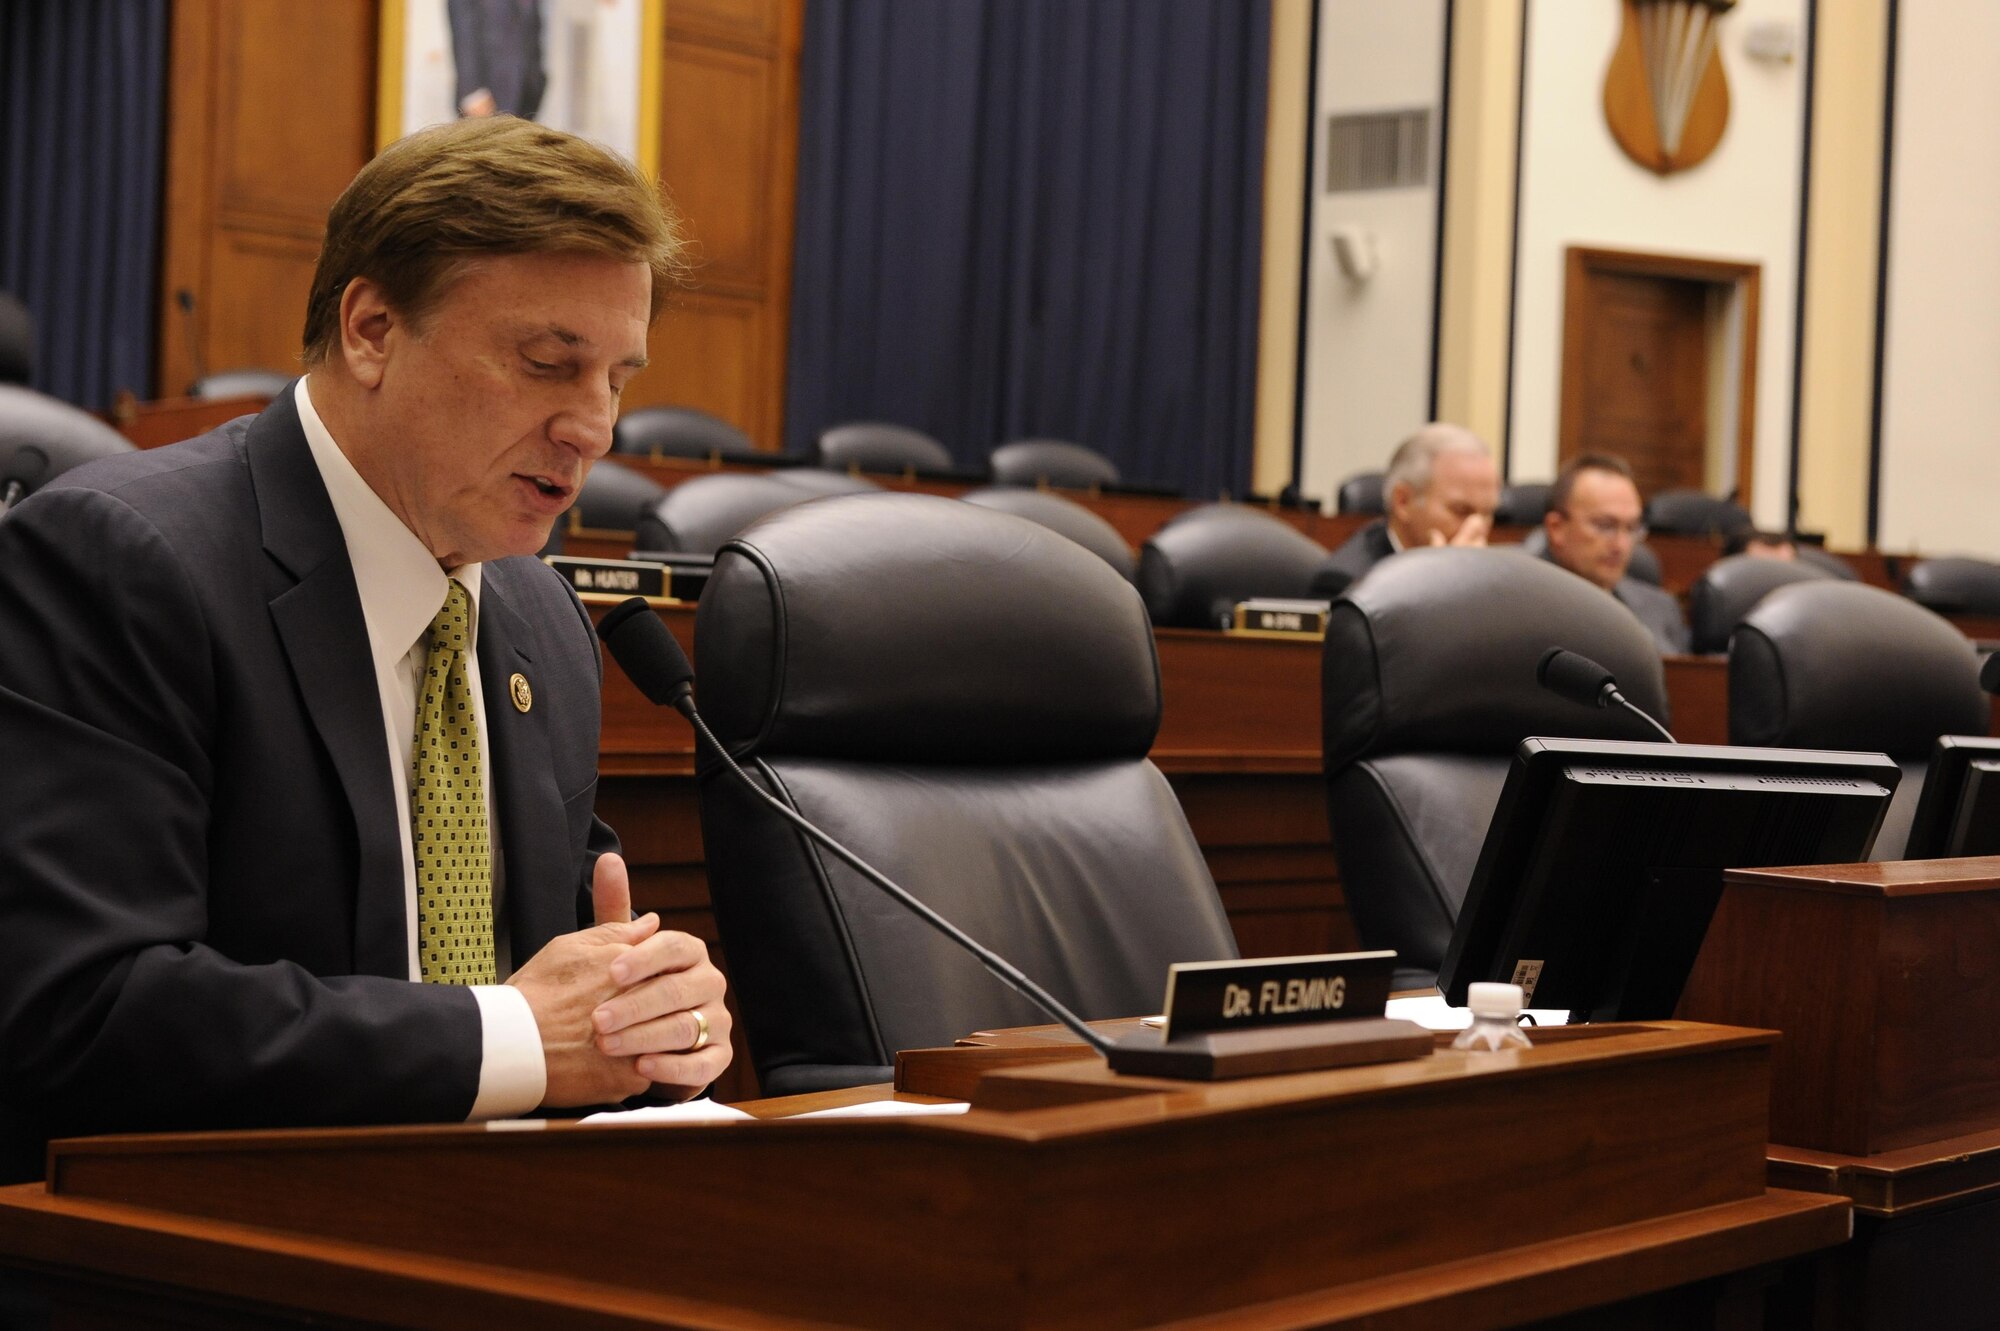 U.S. Rep. John Fleming, R-La., asks questions during a hearing in Washington, D.C., on Sept. 29, 2015. The hearing focused on the current and future vision of the Air Force’s bomber force structure. (U.S. Air Force photo/Staff Sgt. Whitney Stanfield)